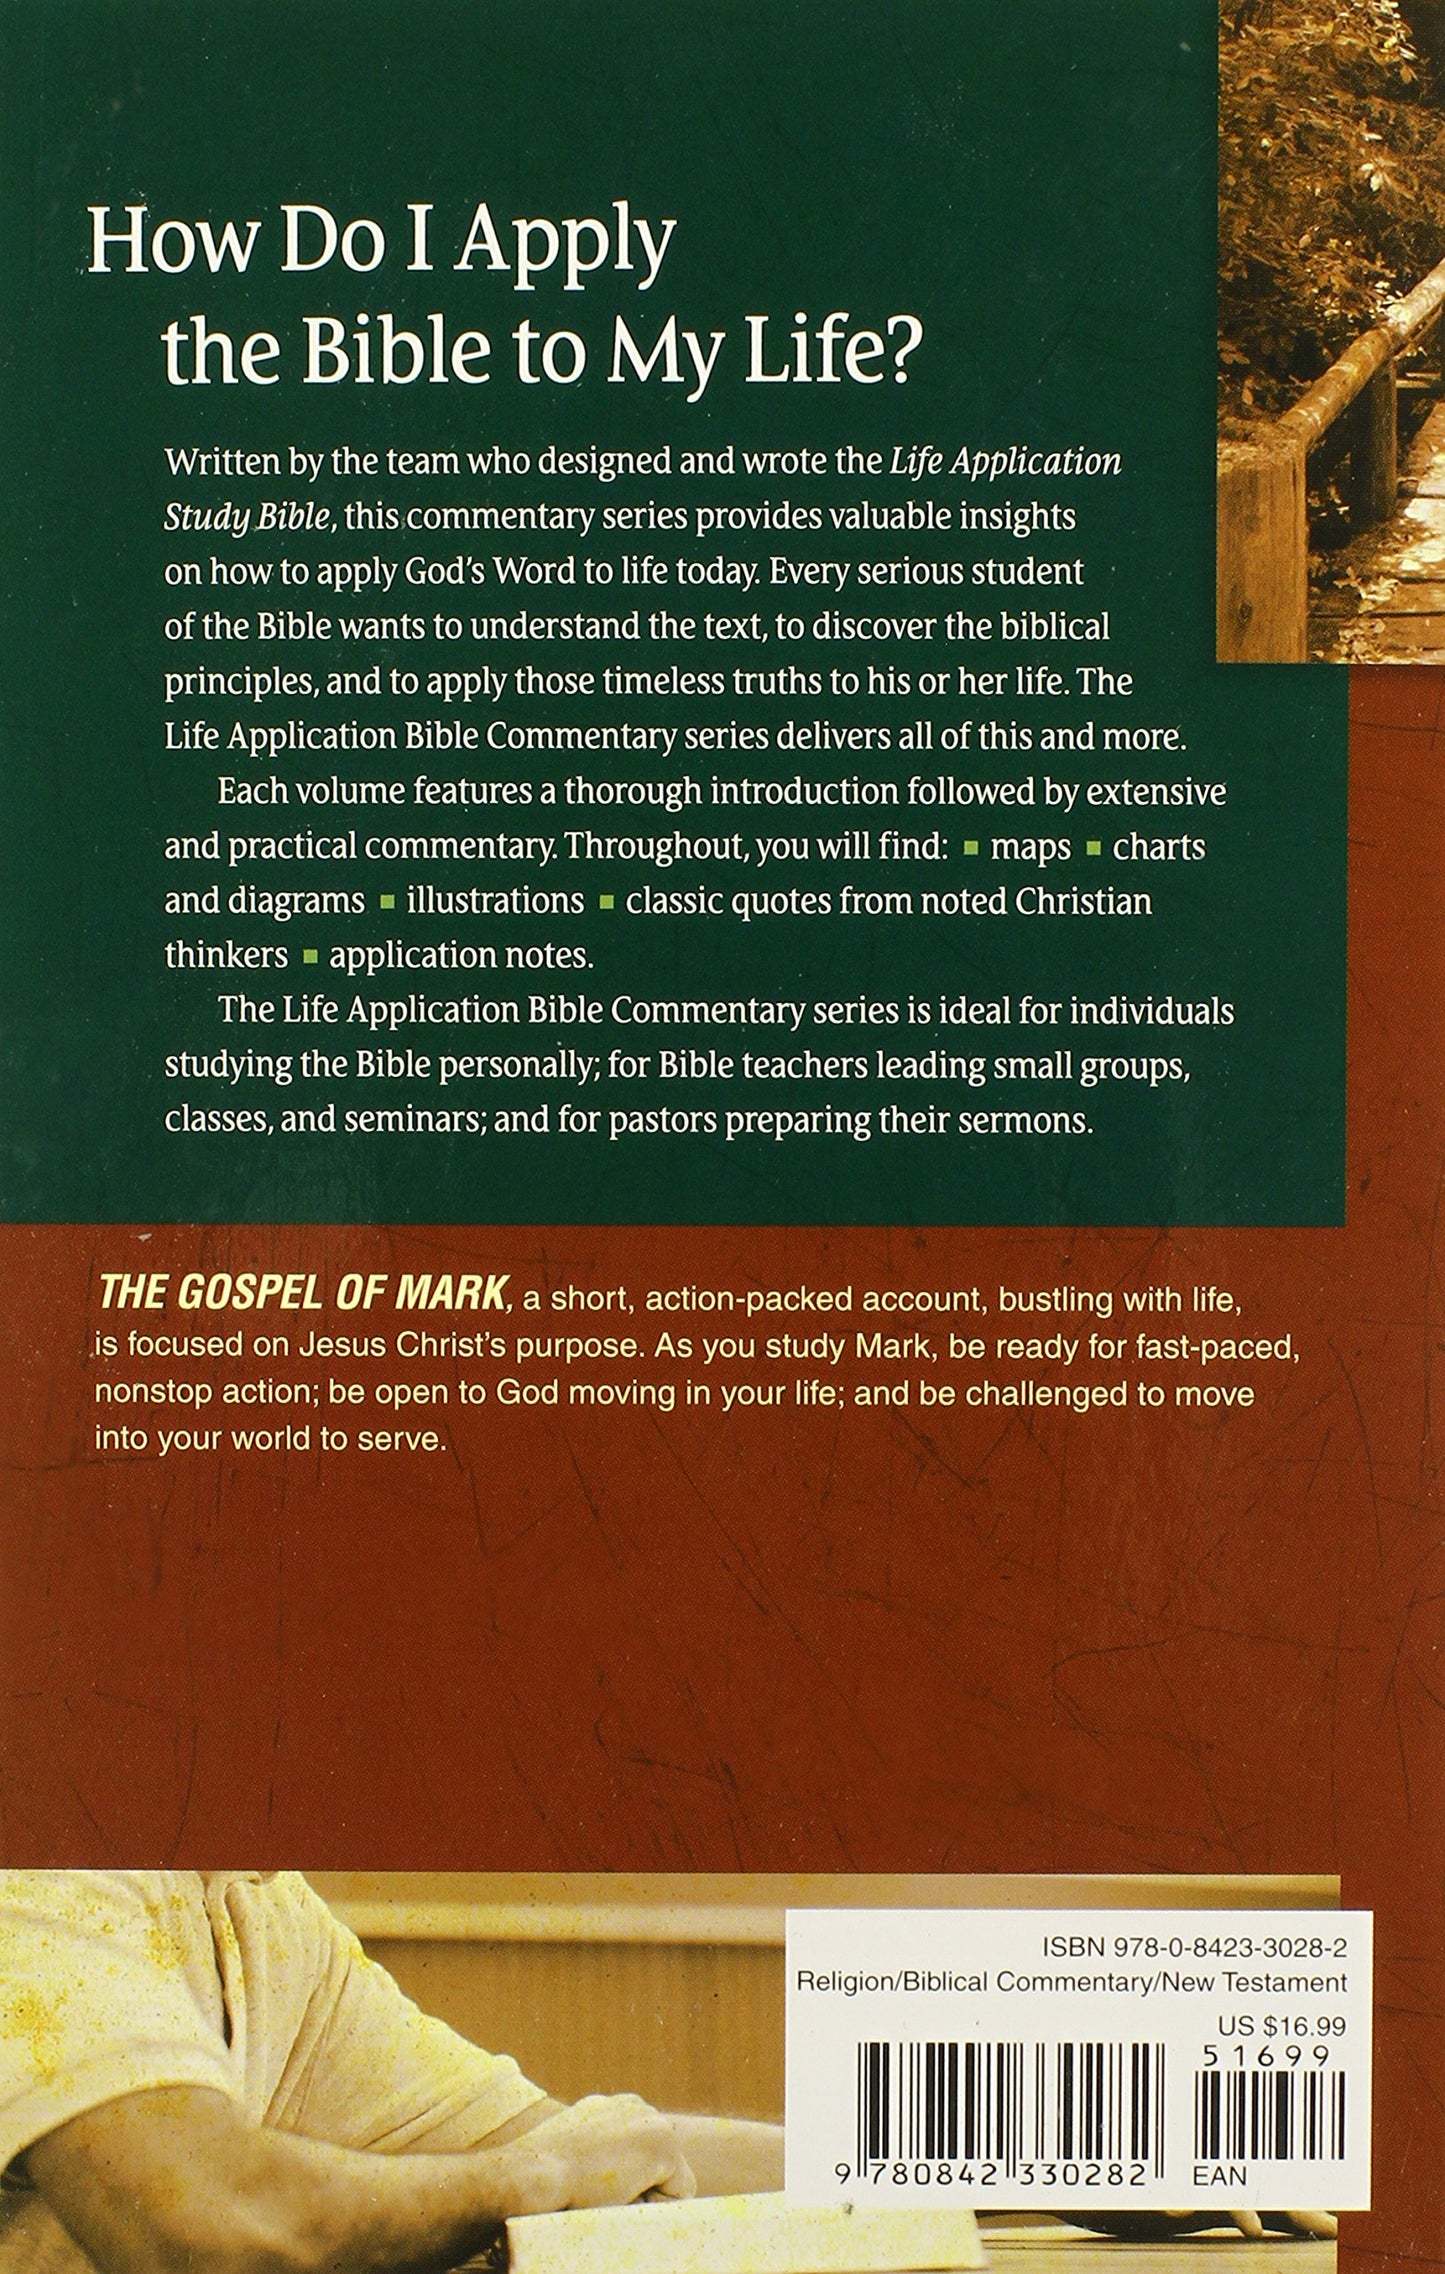 Mark (Life Application Bible Commentary)